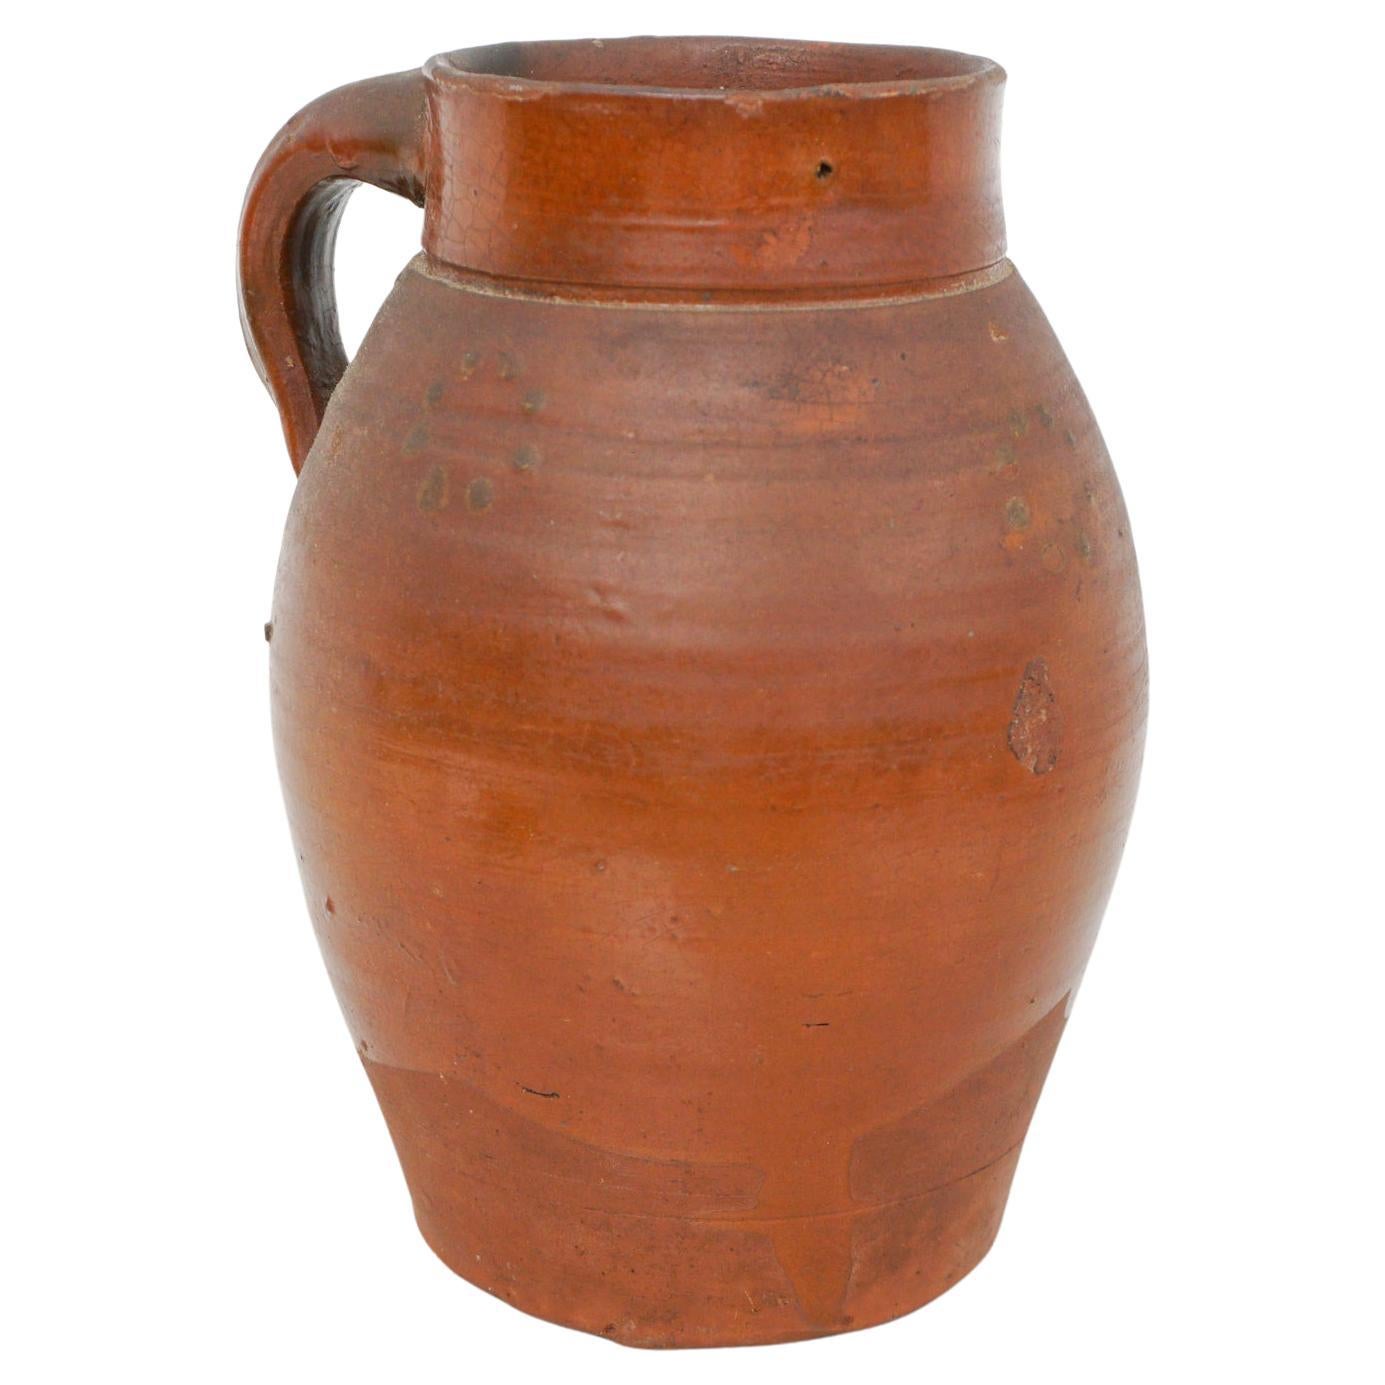 Early 20th Century Traditional Spanish Ceramic Pitcher